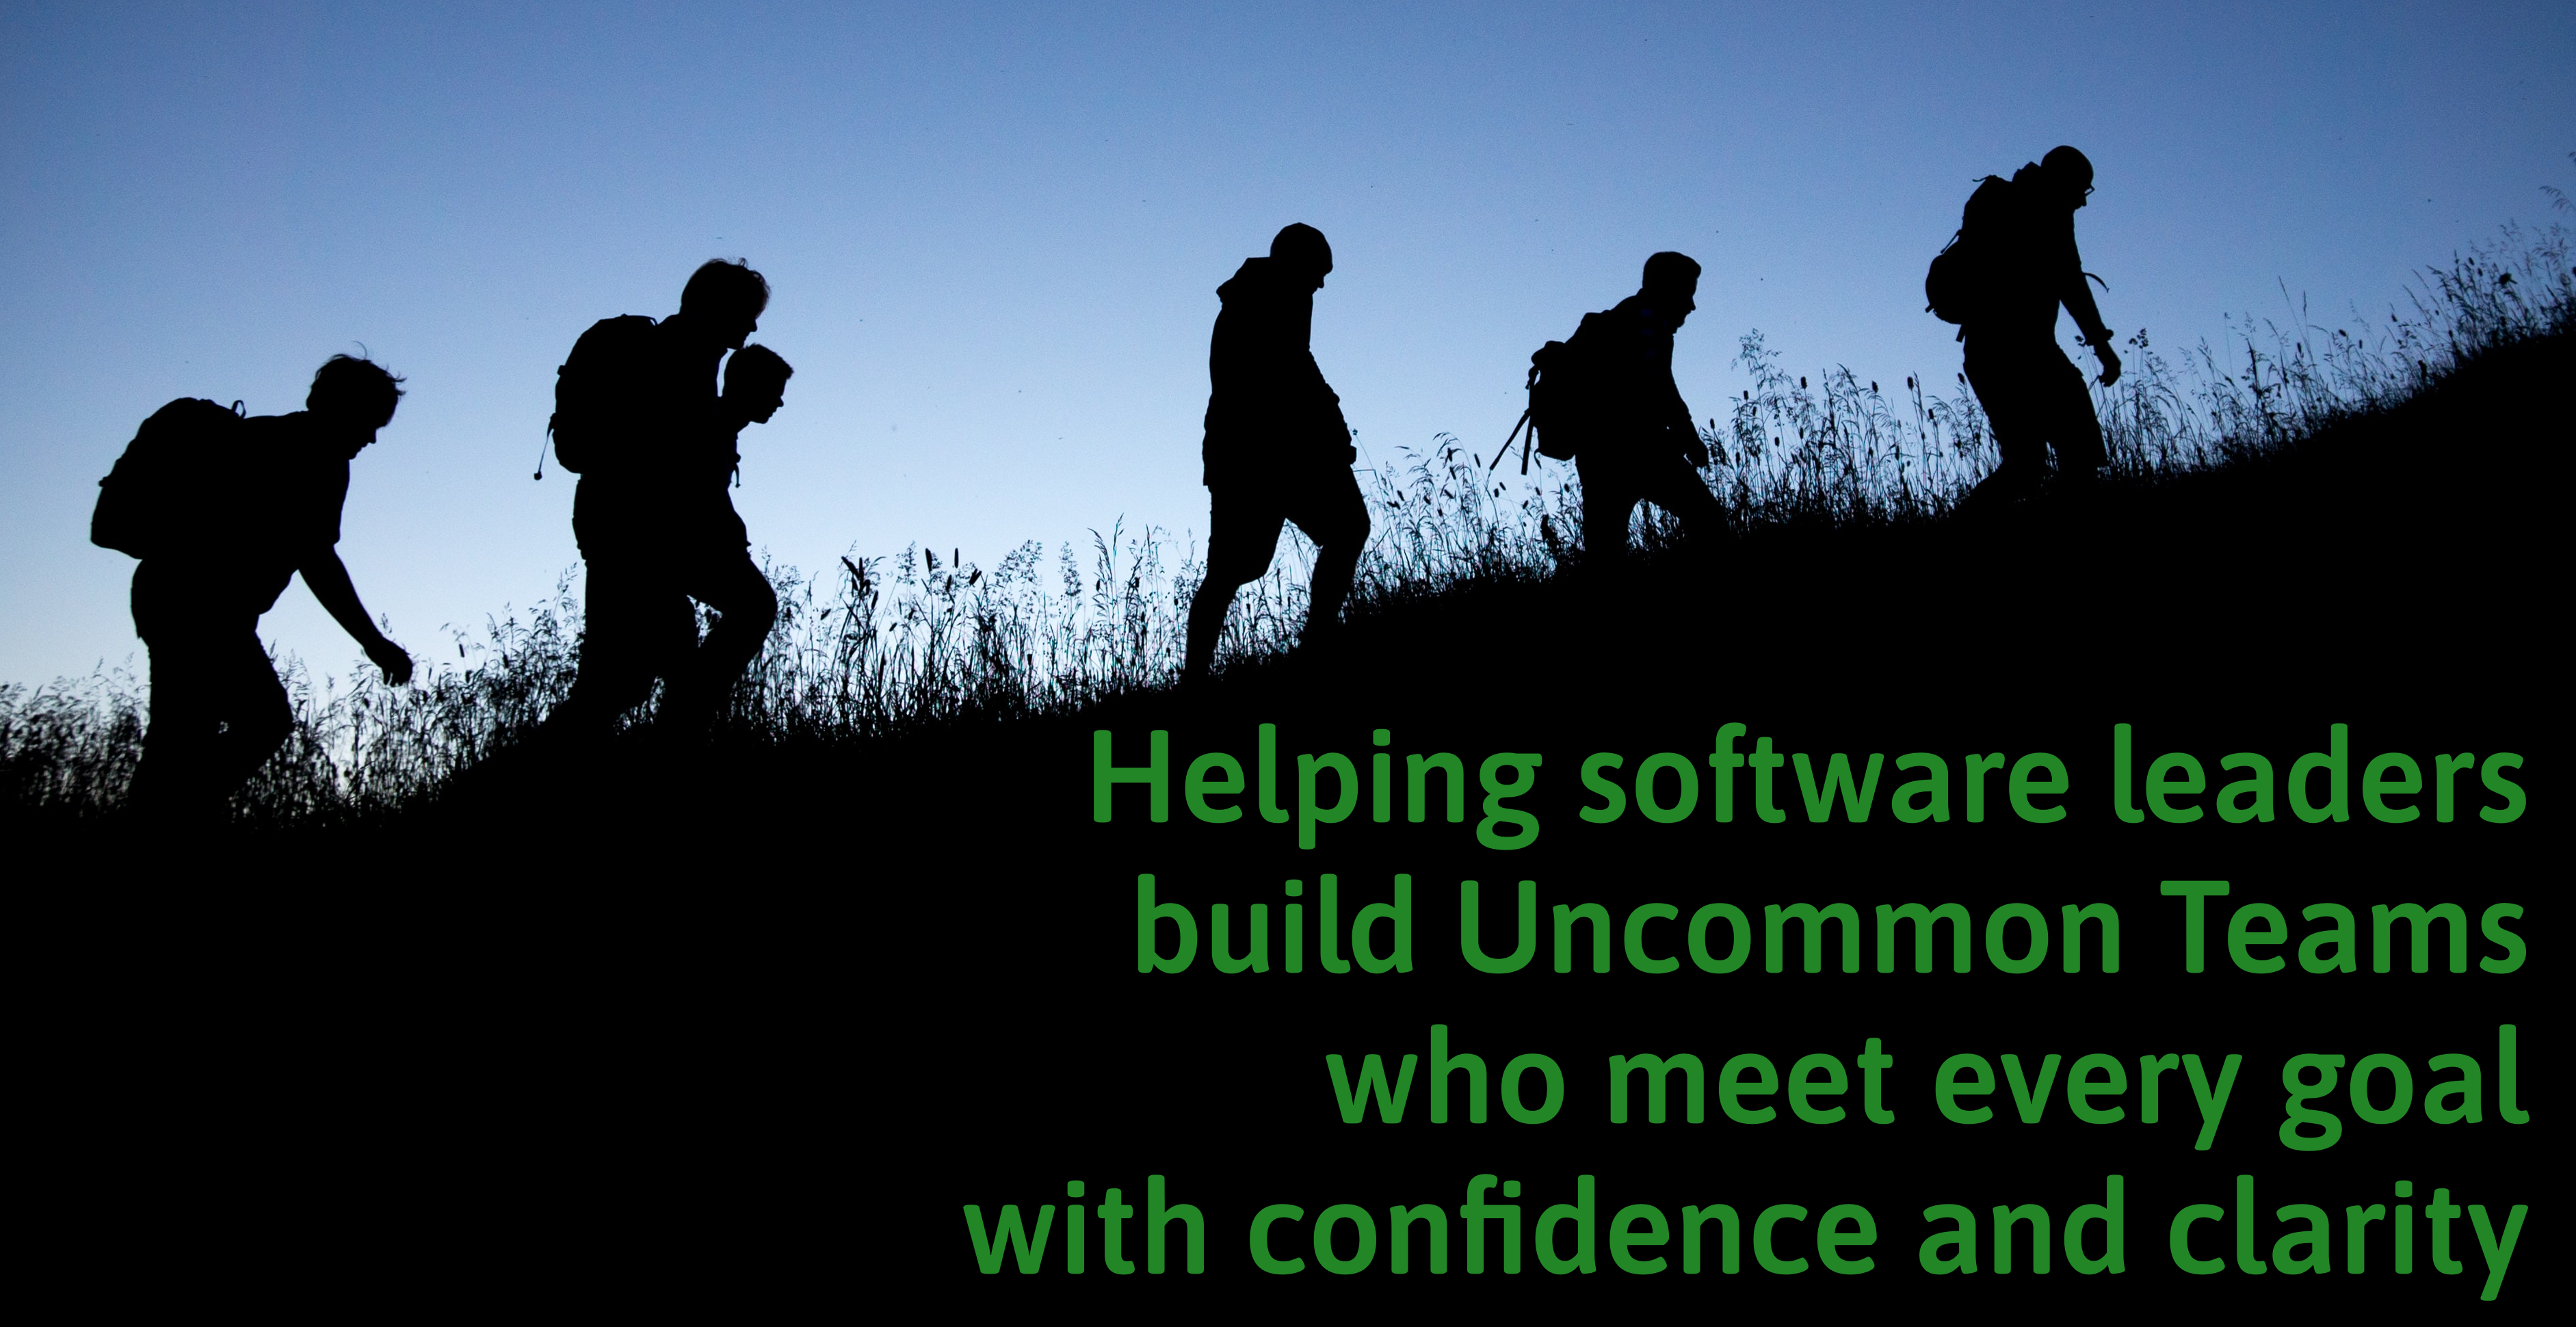 Helping software leaders make Uncommon Change, even when they do not know where they are going
        or how to get there; build Uncommon Teams who meet every goal with confidence and clarity